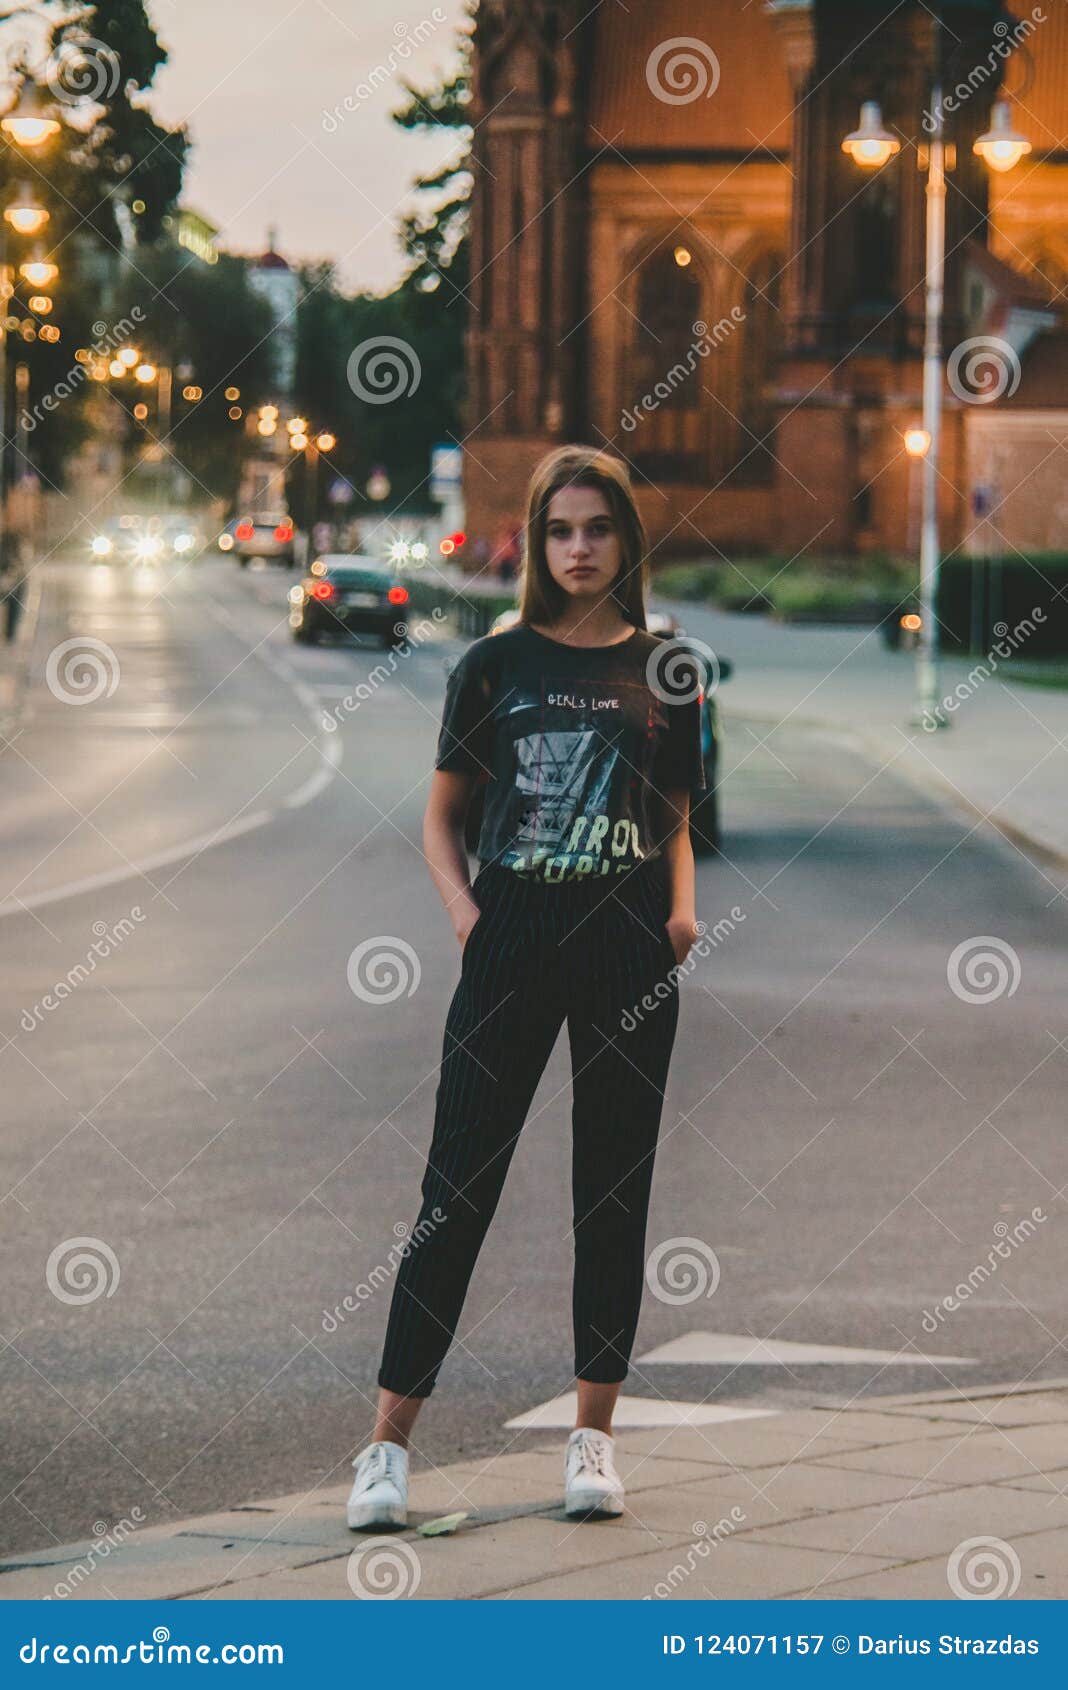 Full Length Portrait of Young Teen Girl Stock Image - Image of ...